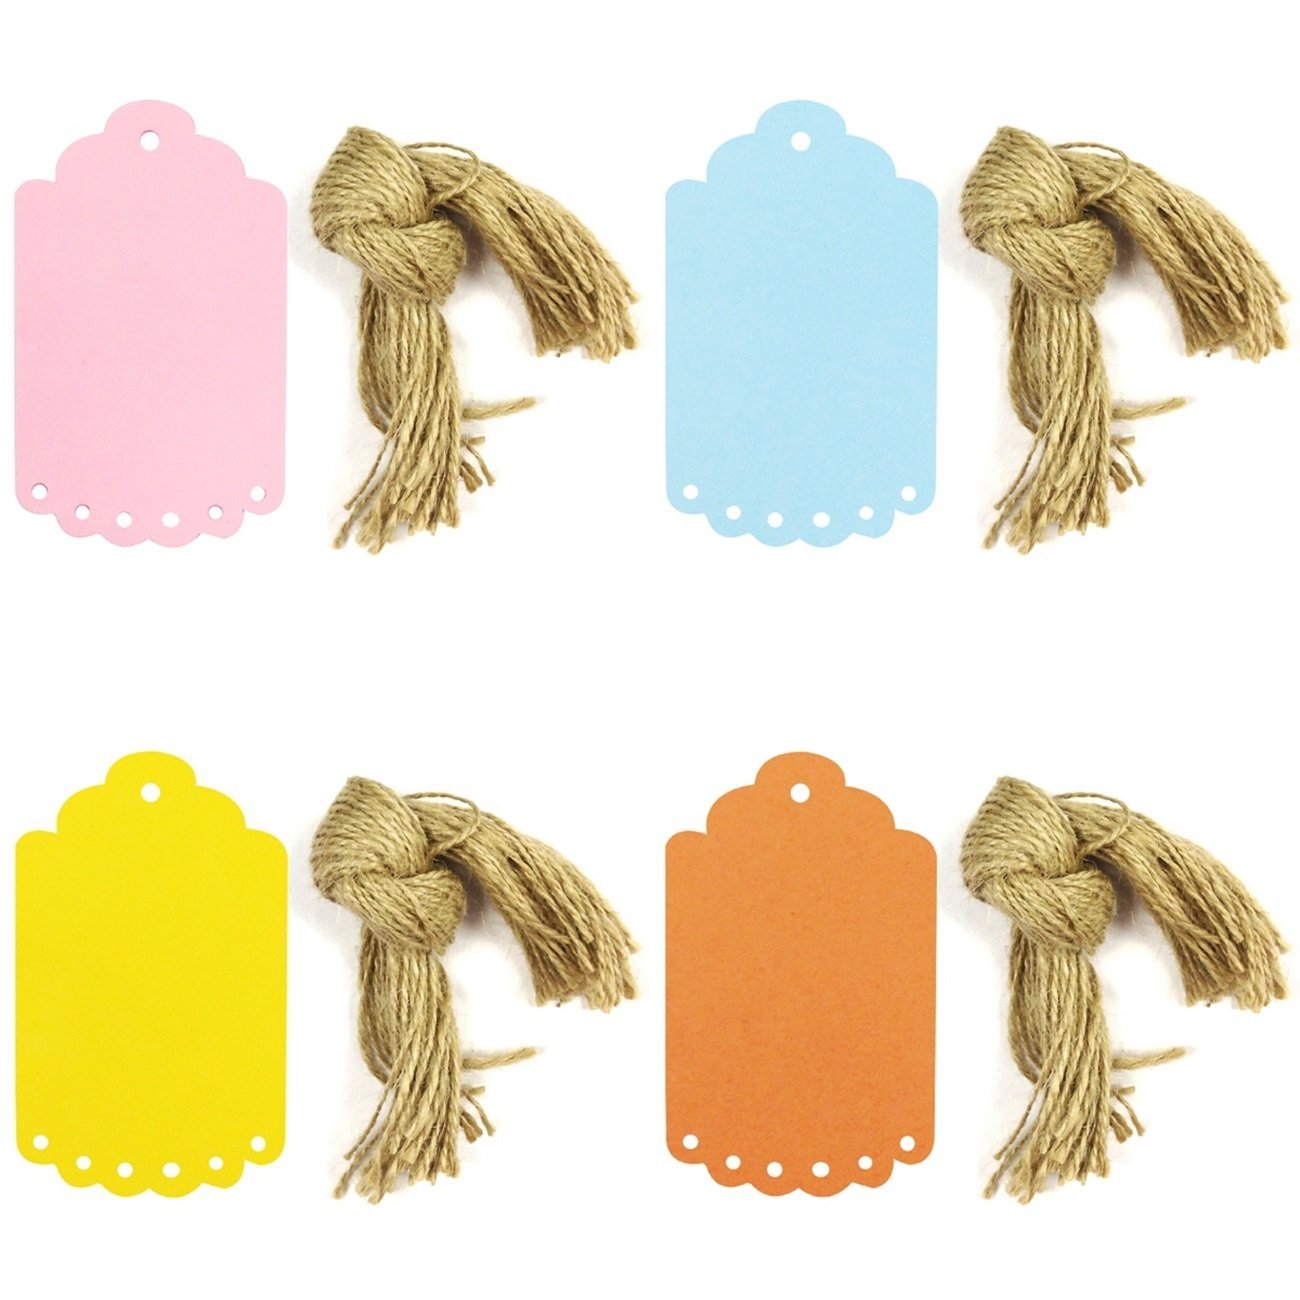 Colored Merchandise Tags with Strings